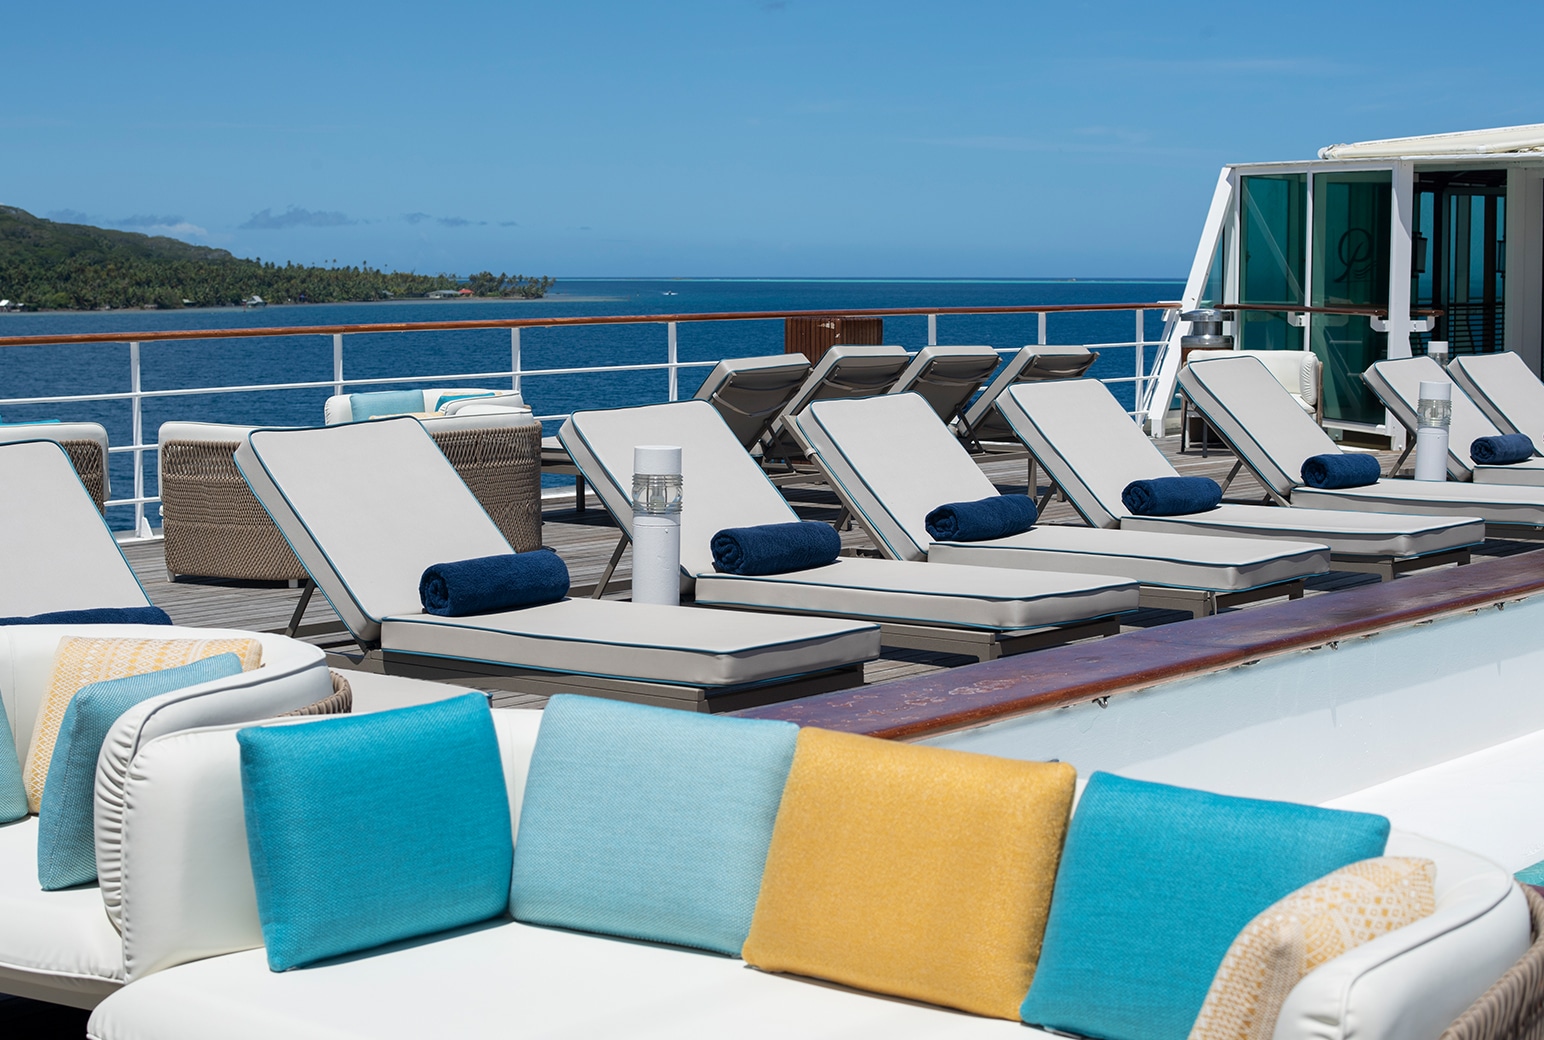 Pool deck loungers